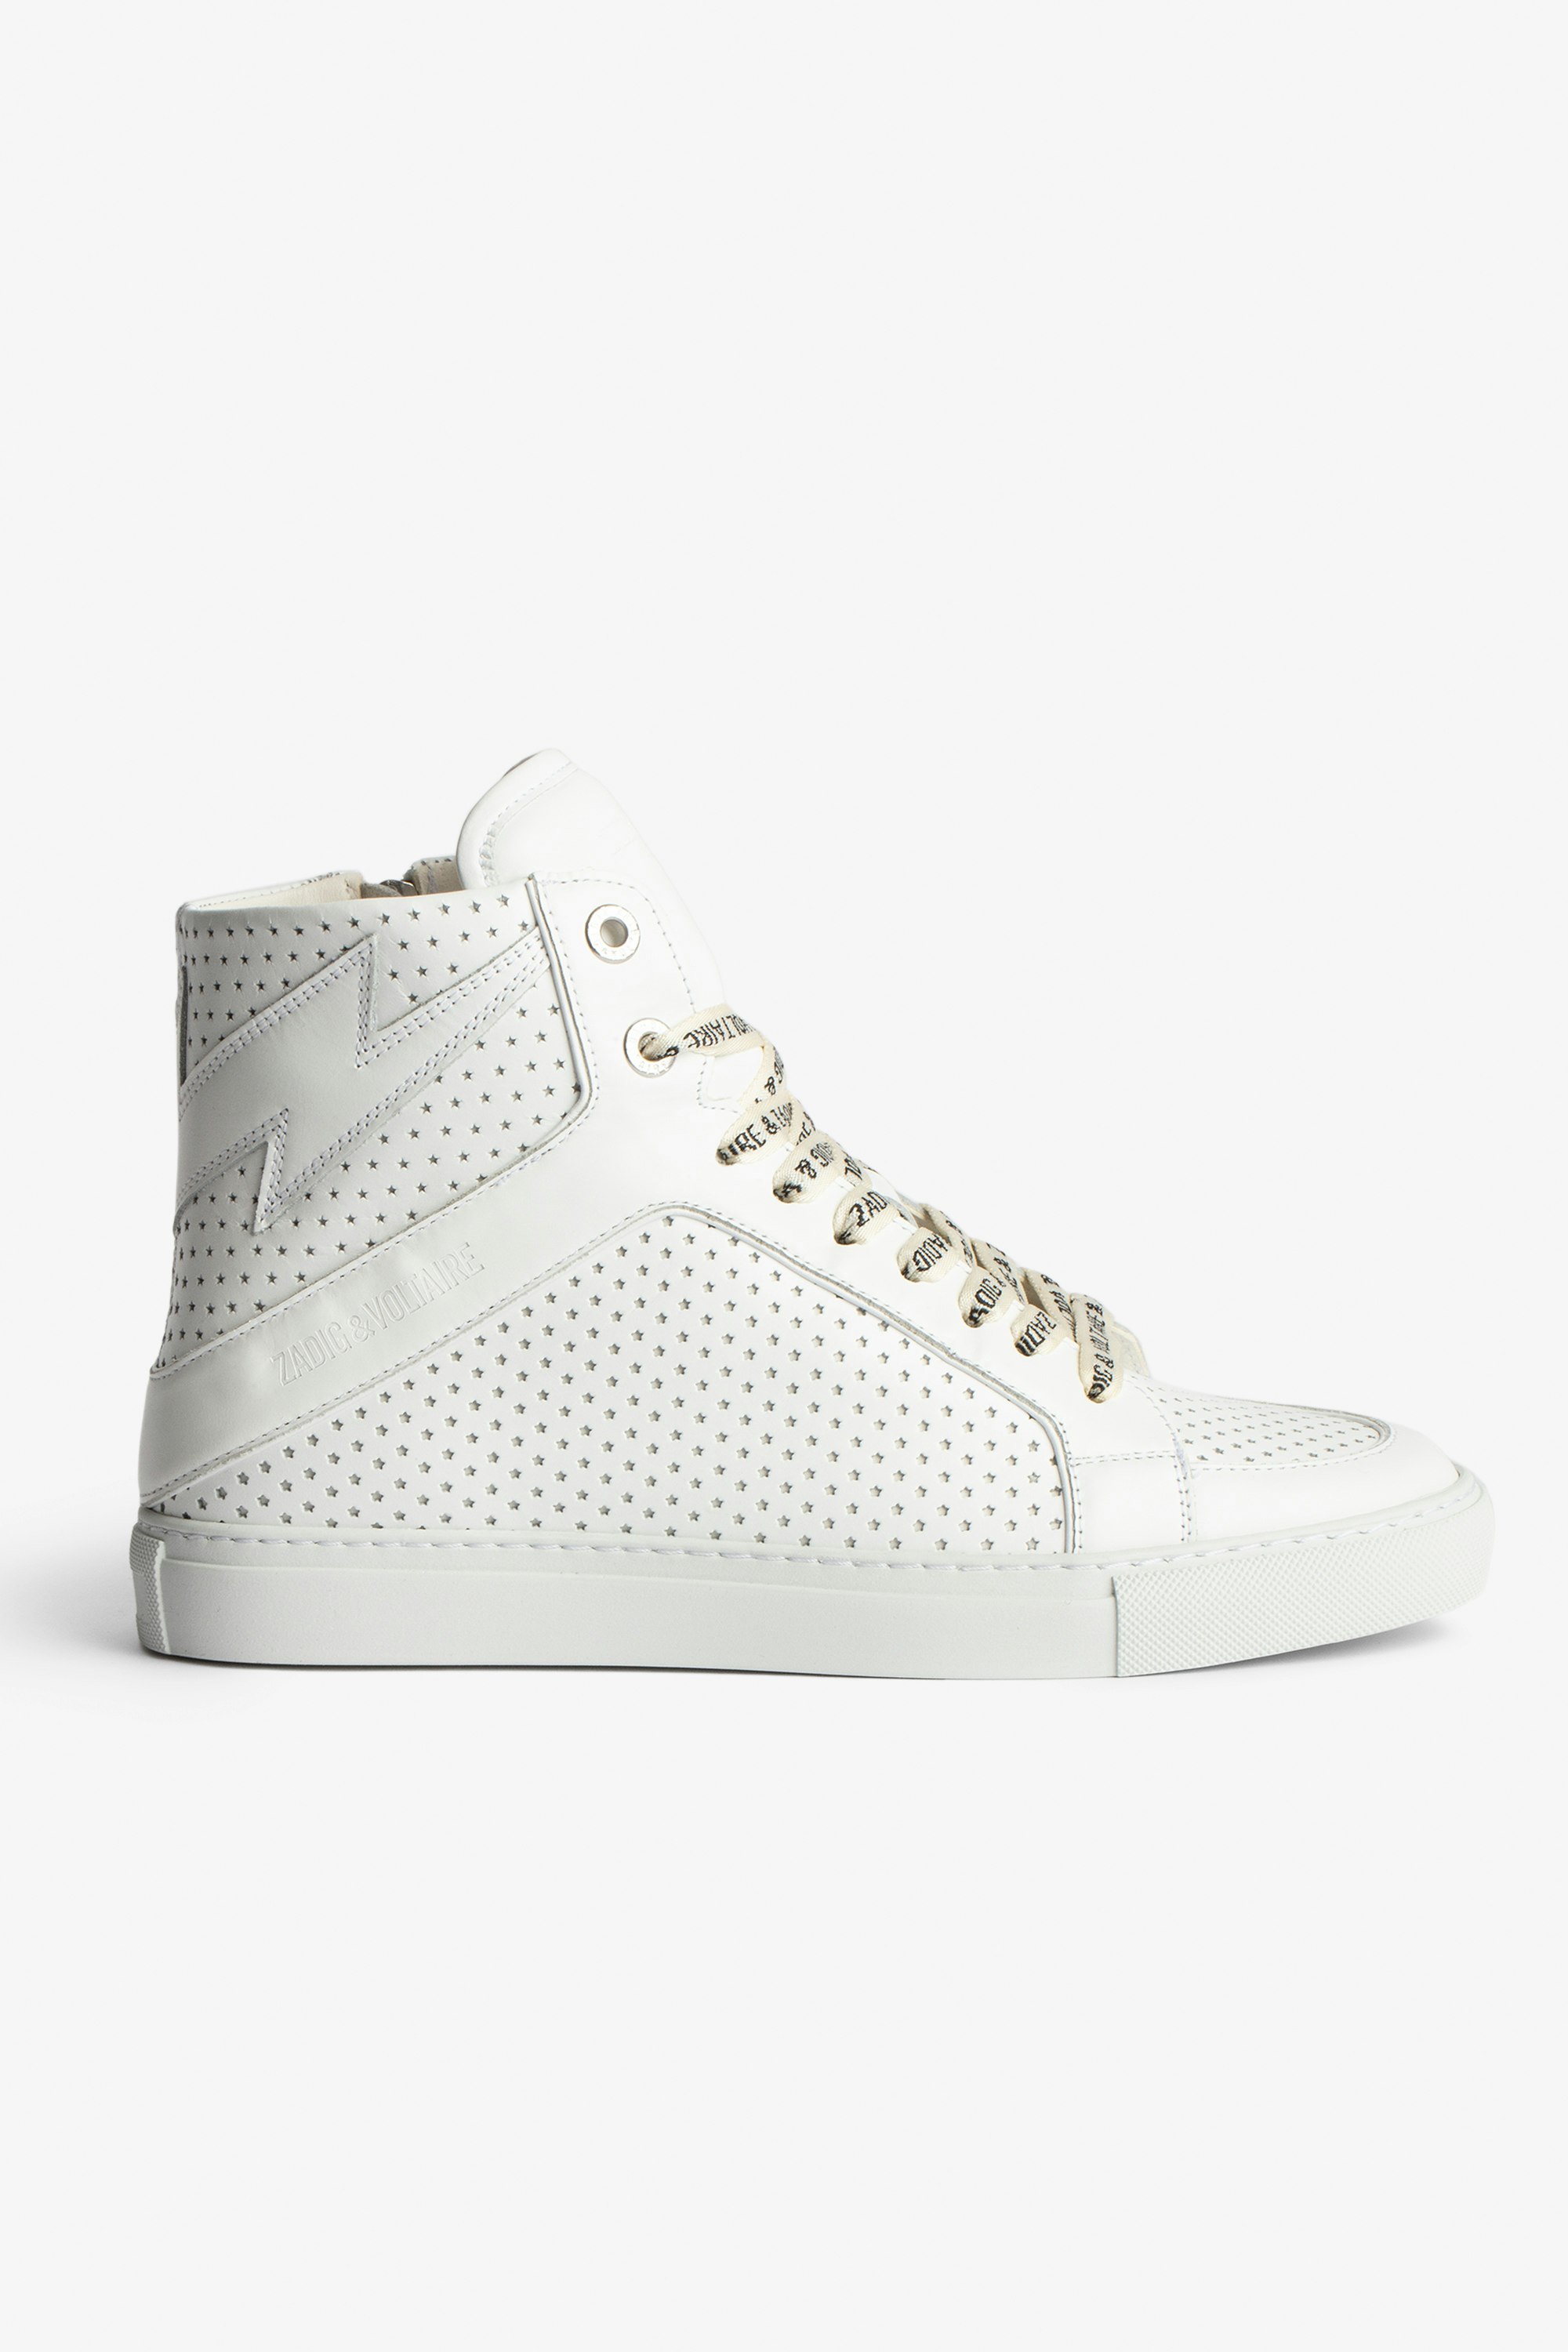 ZV1747 High Flash High-Top Trainers Women's high-top trainers in smooth white leather with perforated stars